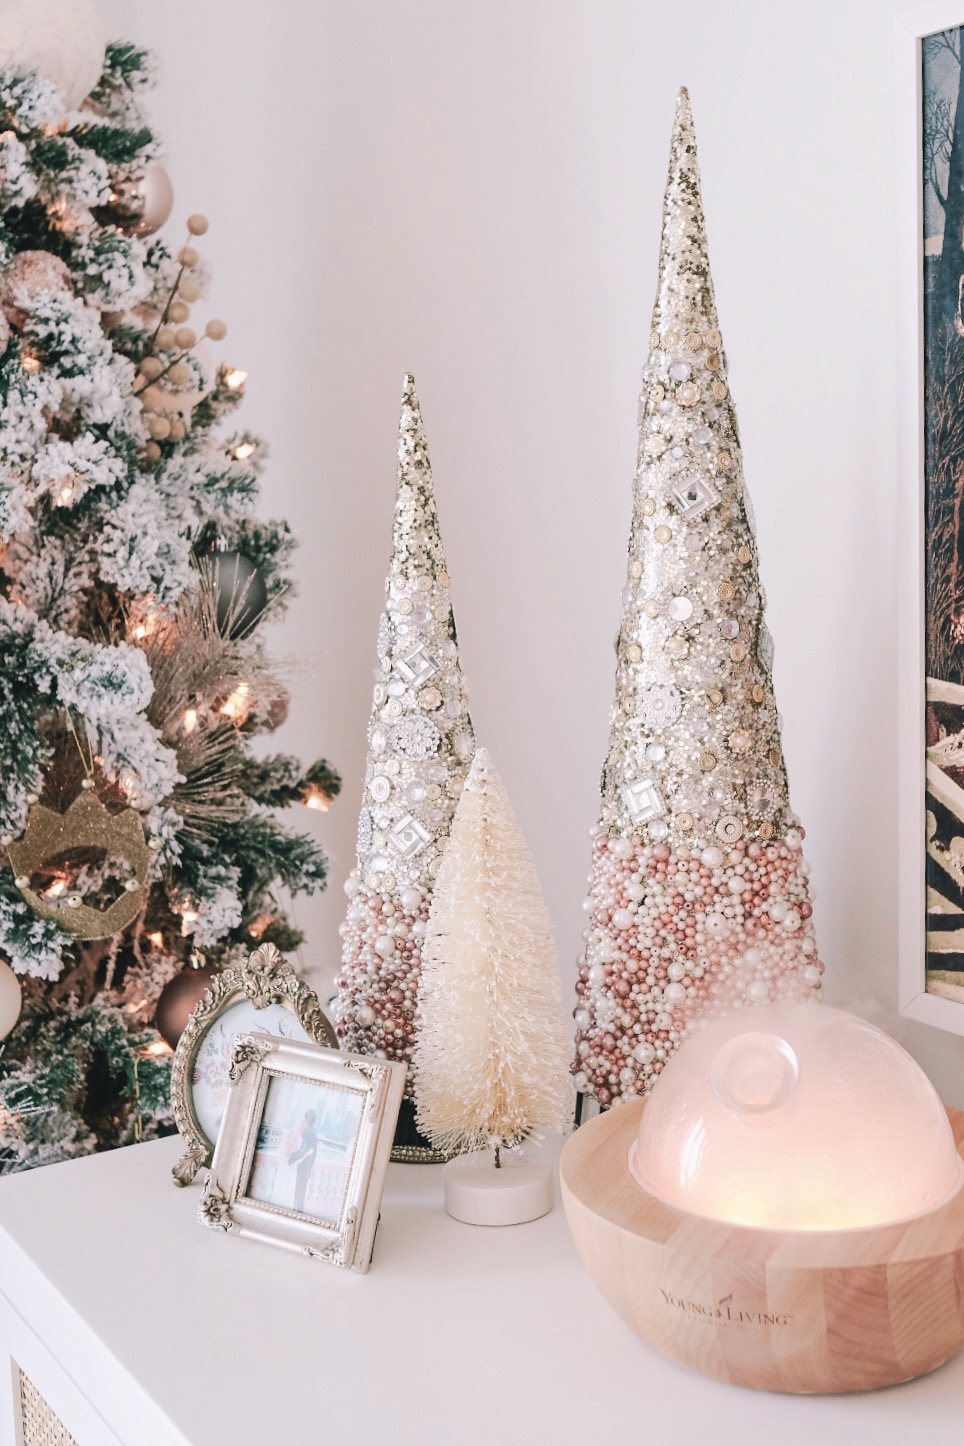 Aria diffuser with Christmas decor | Miss Madeline Rose